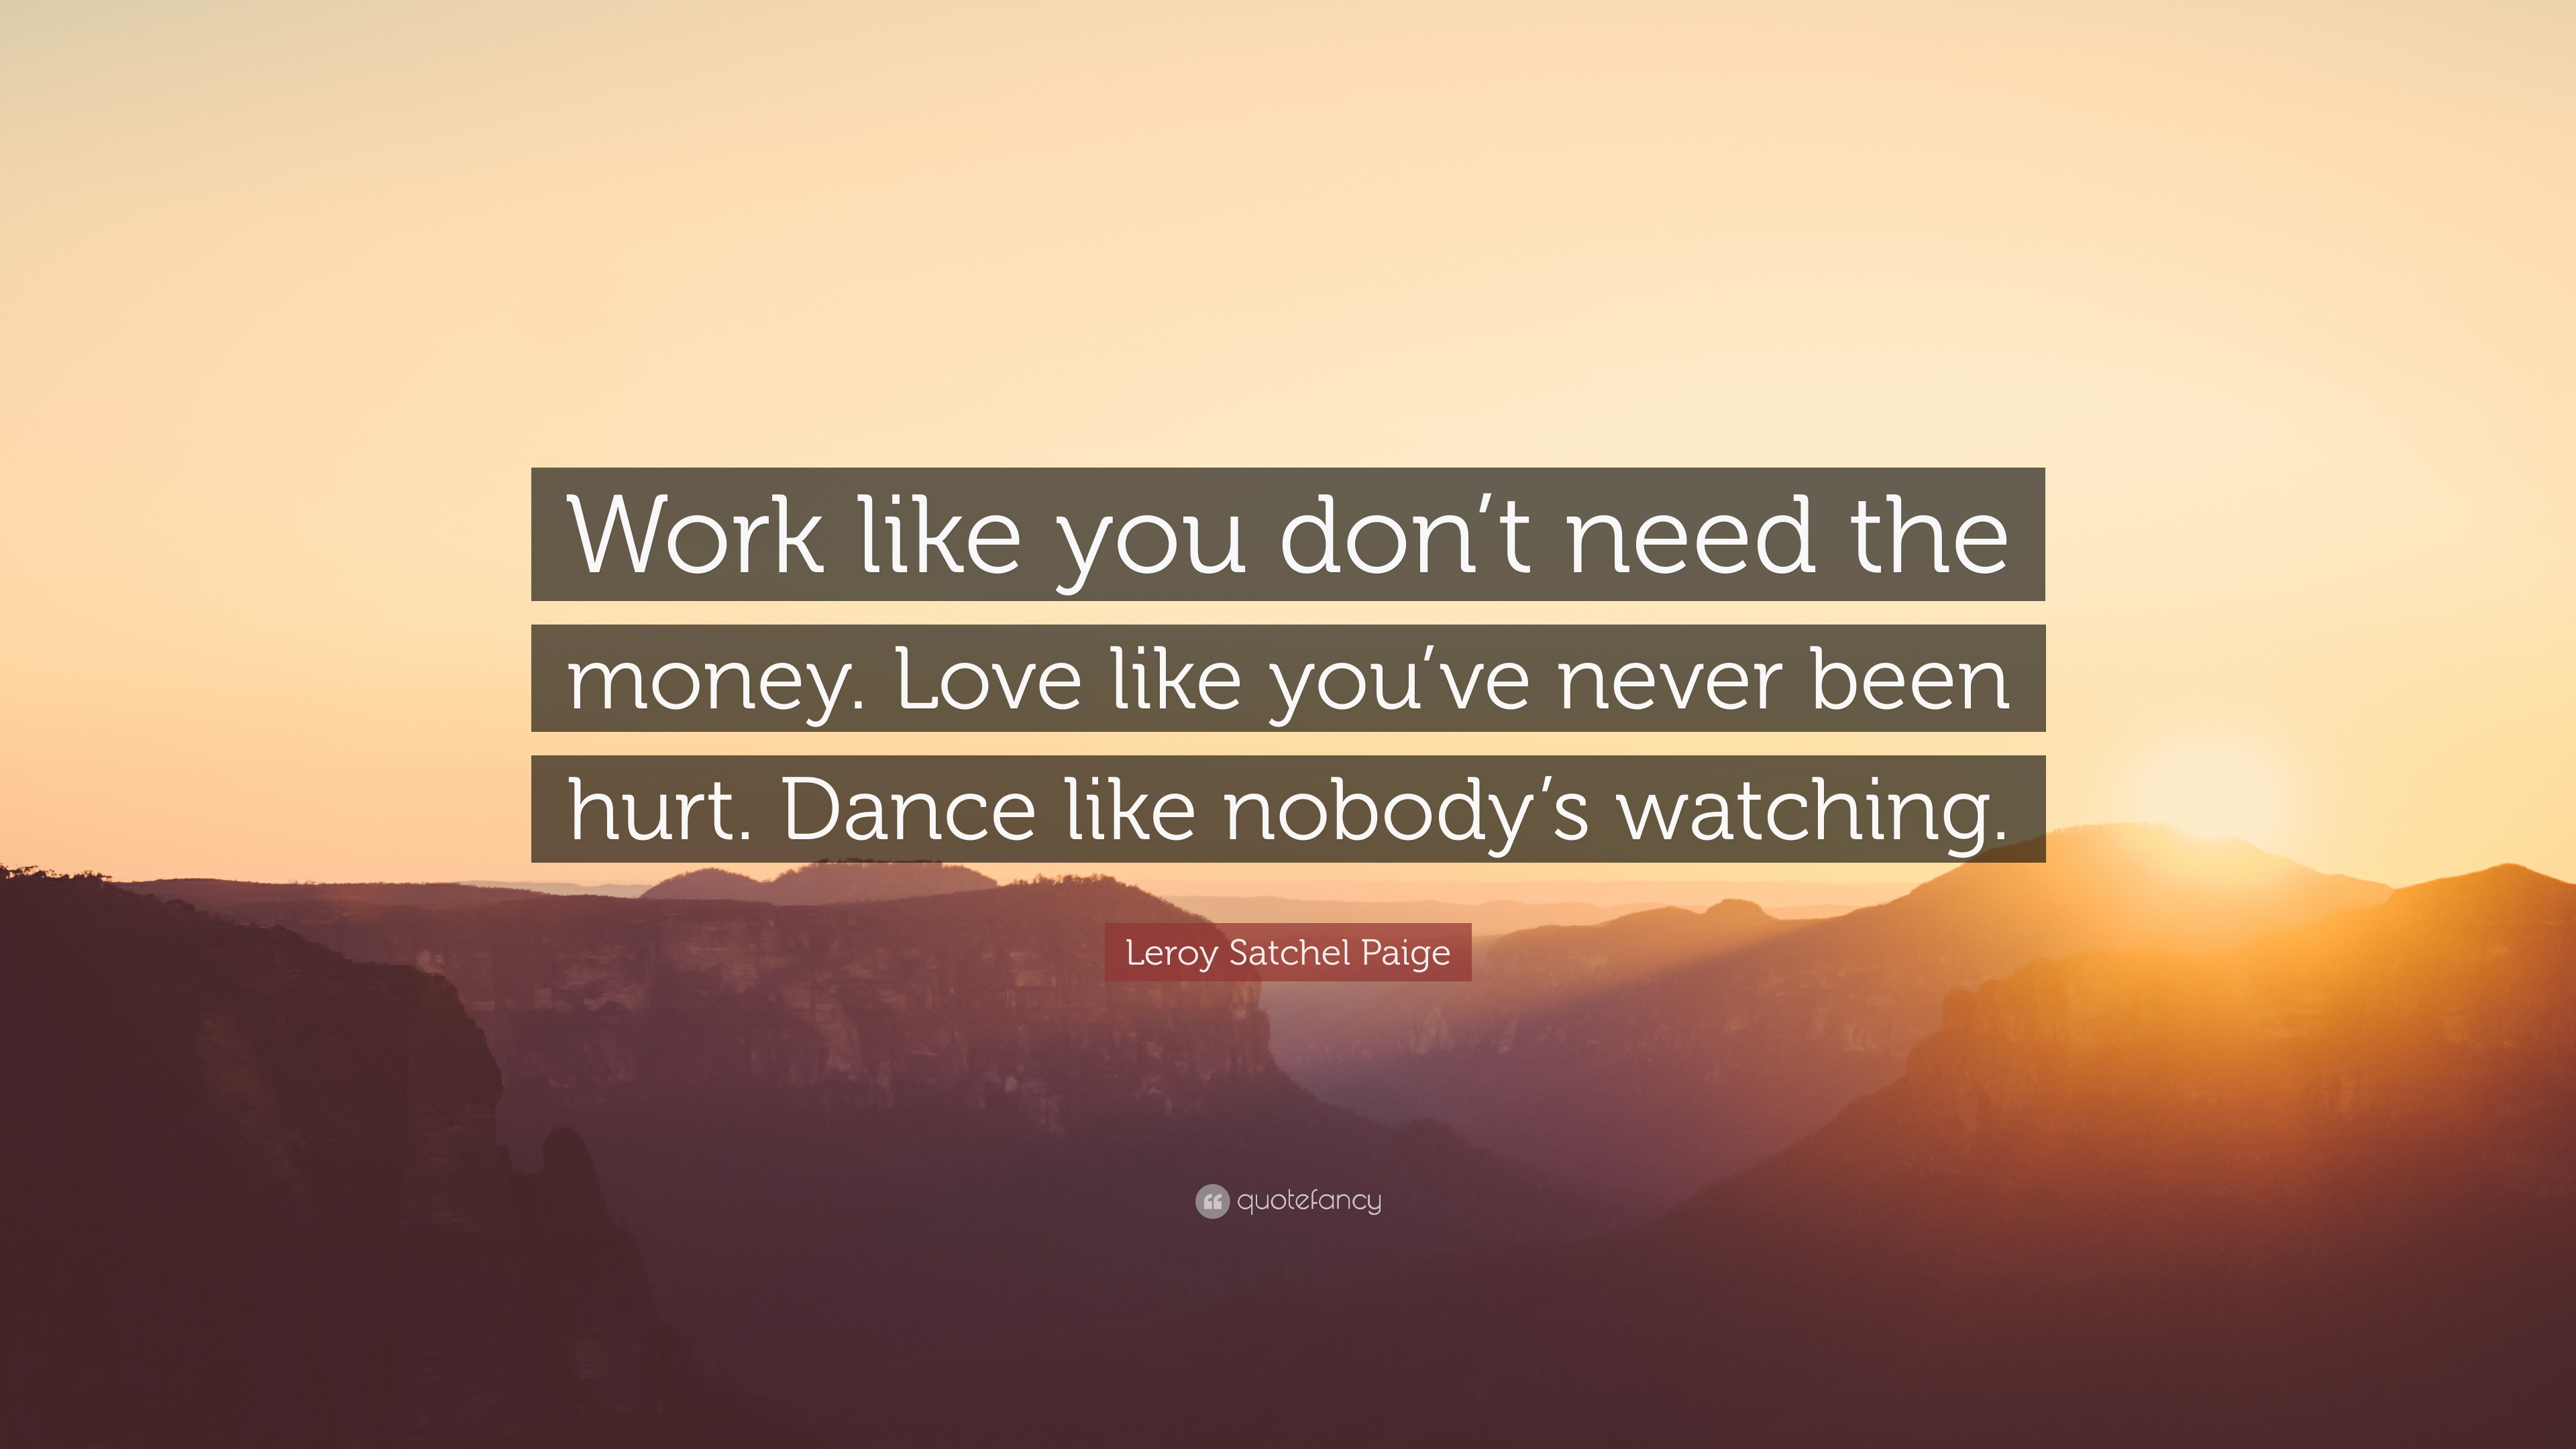 49 Quotes on X: Work like you don't need the money. Love like you